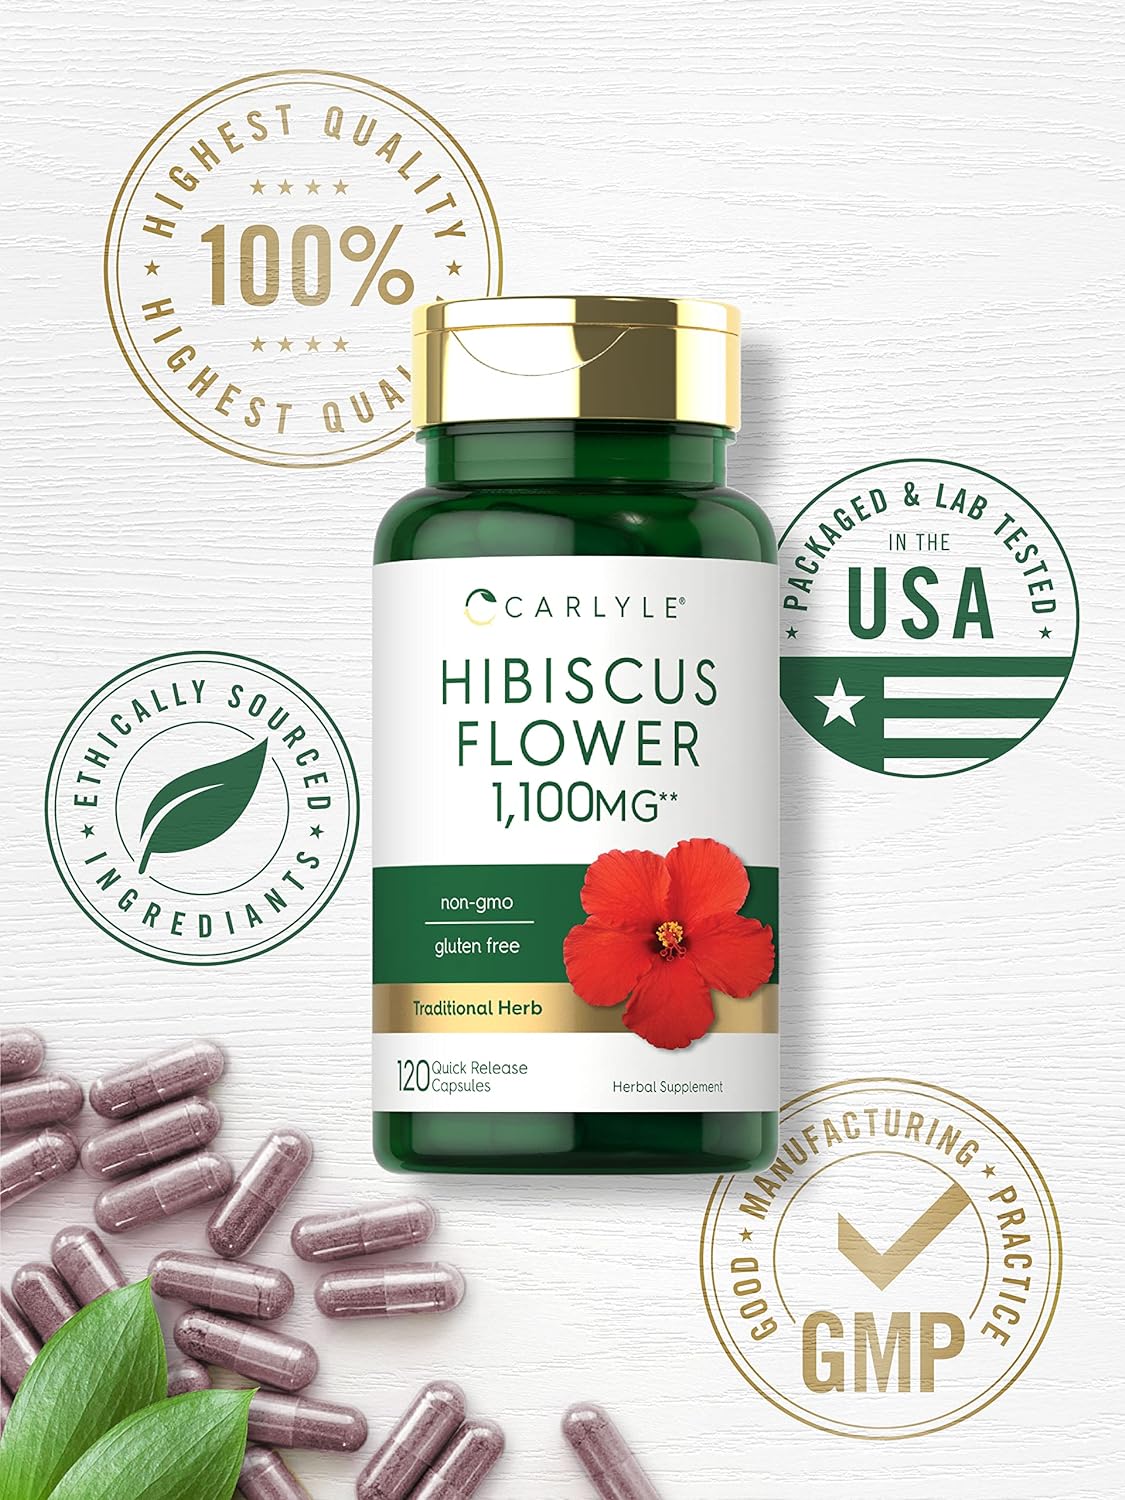 Carlyle Hibiscus Flower Extract 1100 mg | 120 Capsules | Non-GMO, Gluten Free Supplement : Health & Household